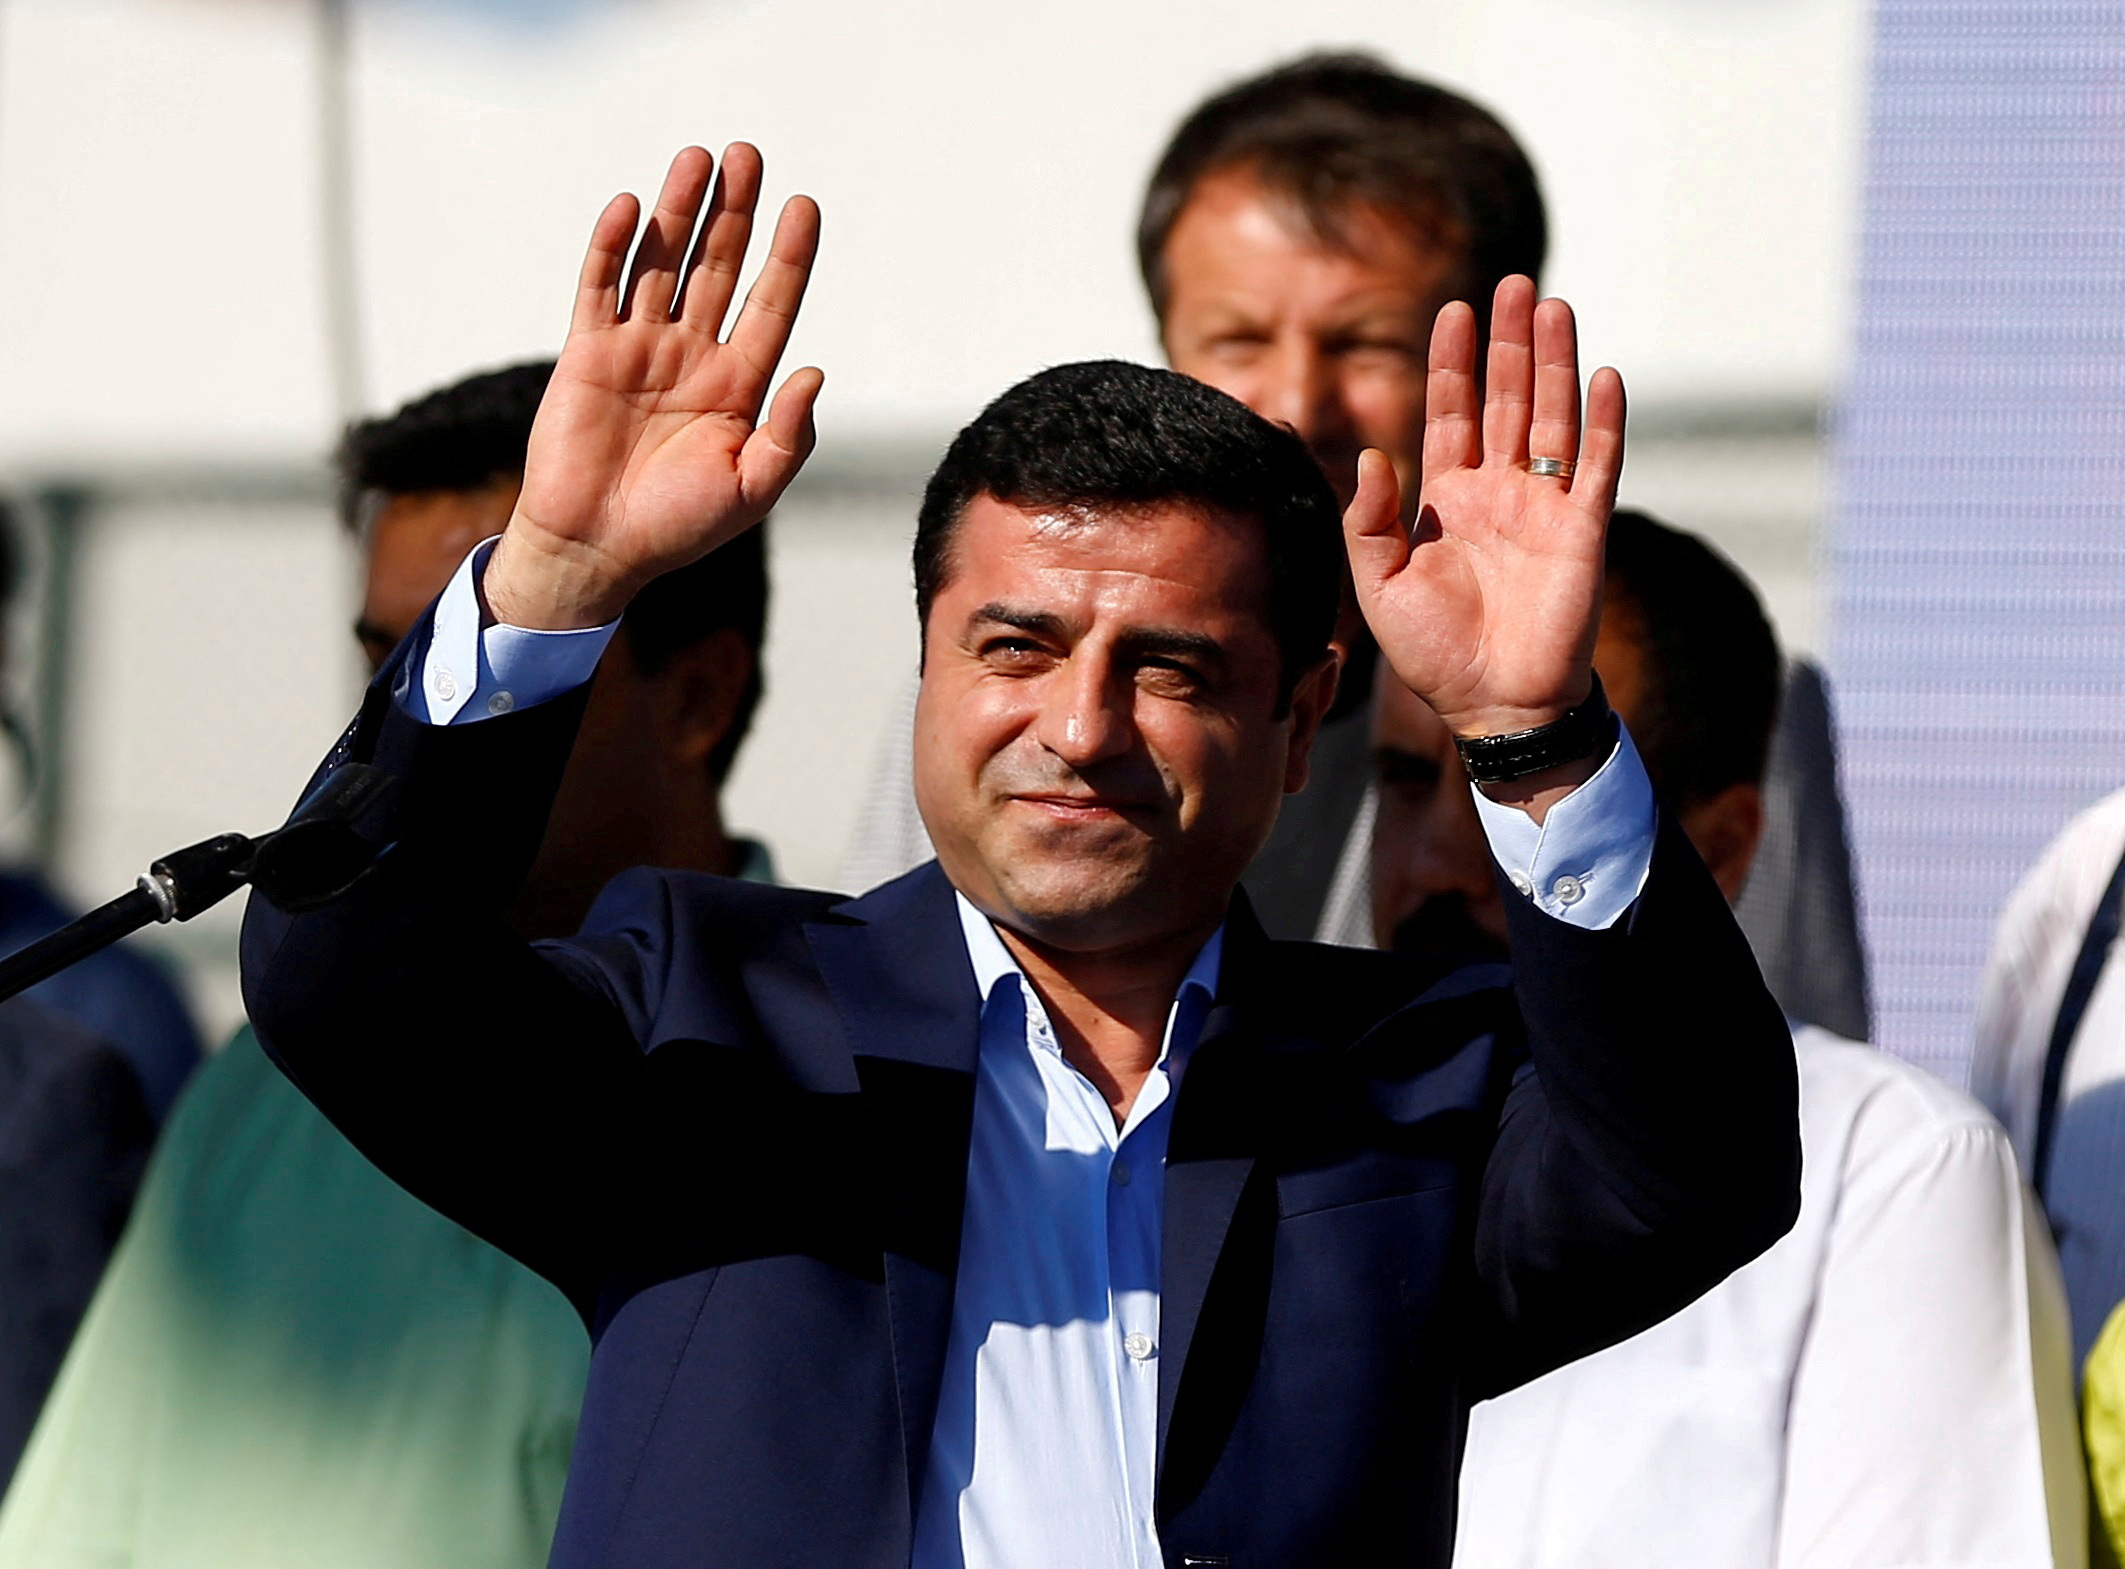 HDP co-leader Demirtas greeting the crowd during a peace rally to protest against Turkish military operations in northern Syria, in Istanbul